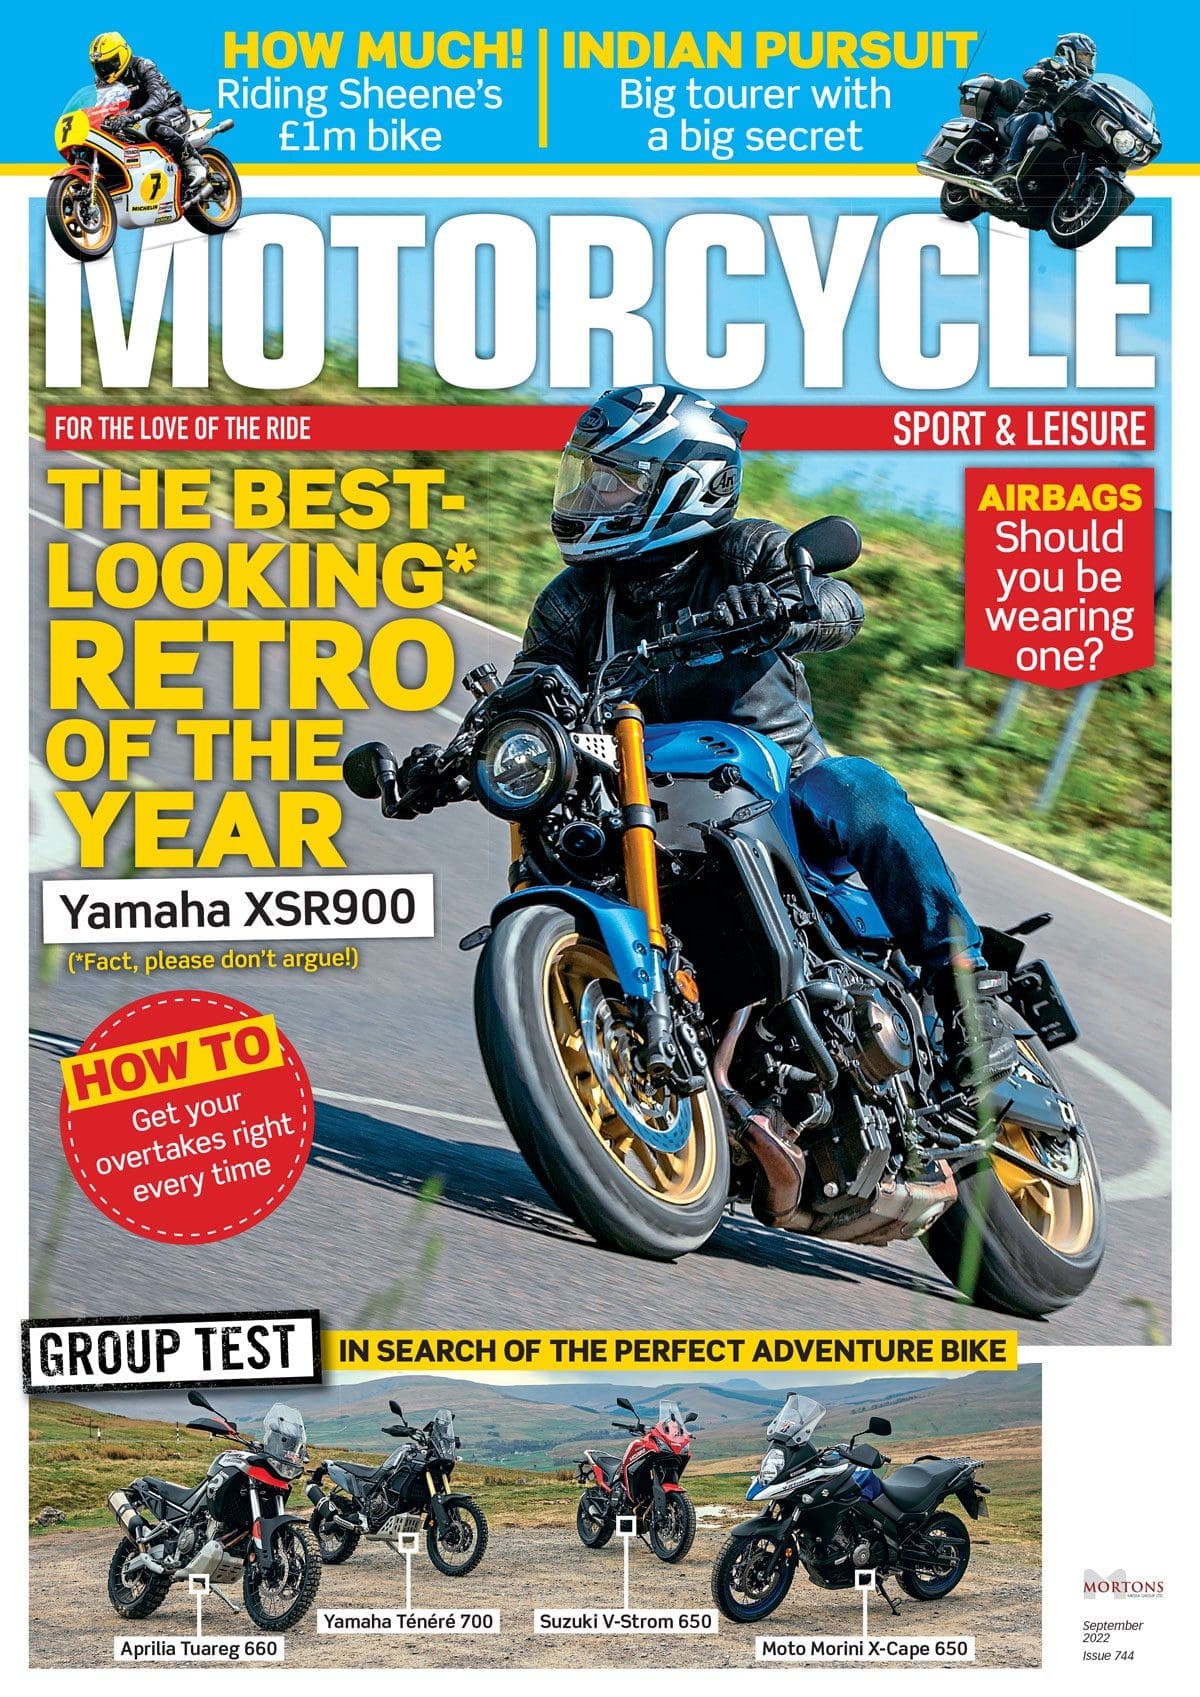 September issue of Motorcycle Sport & Leisure!